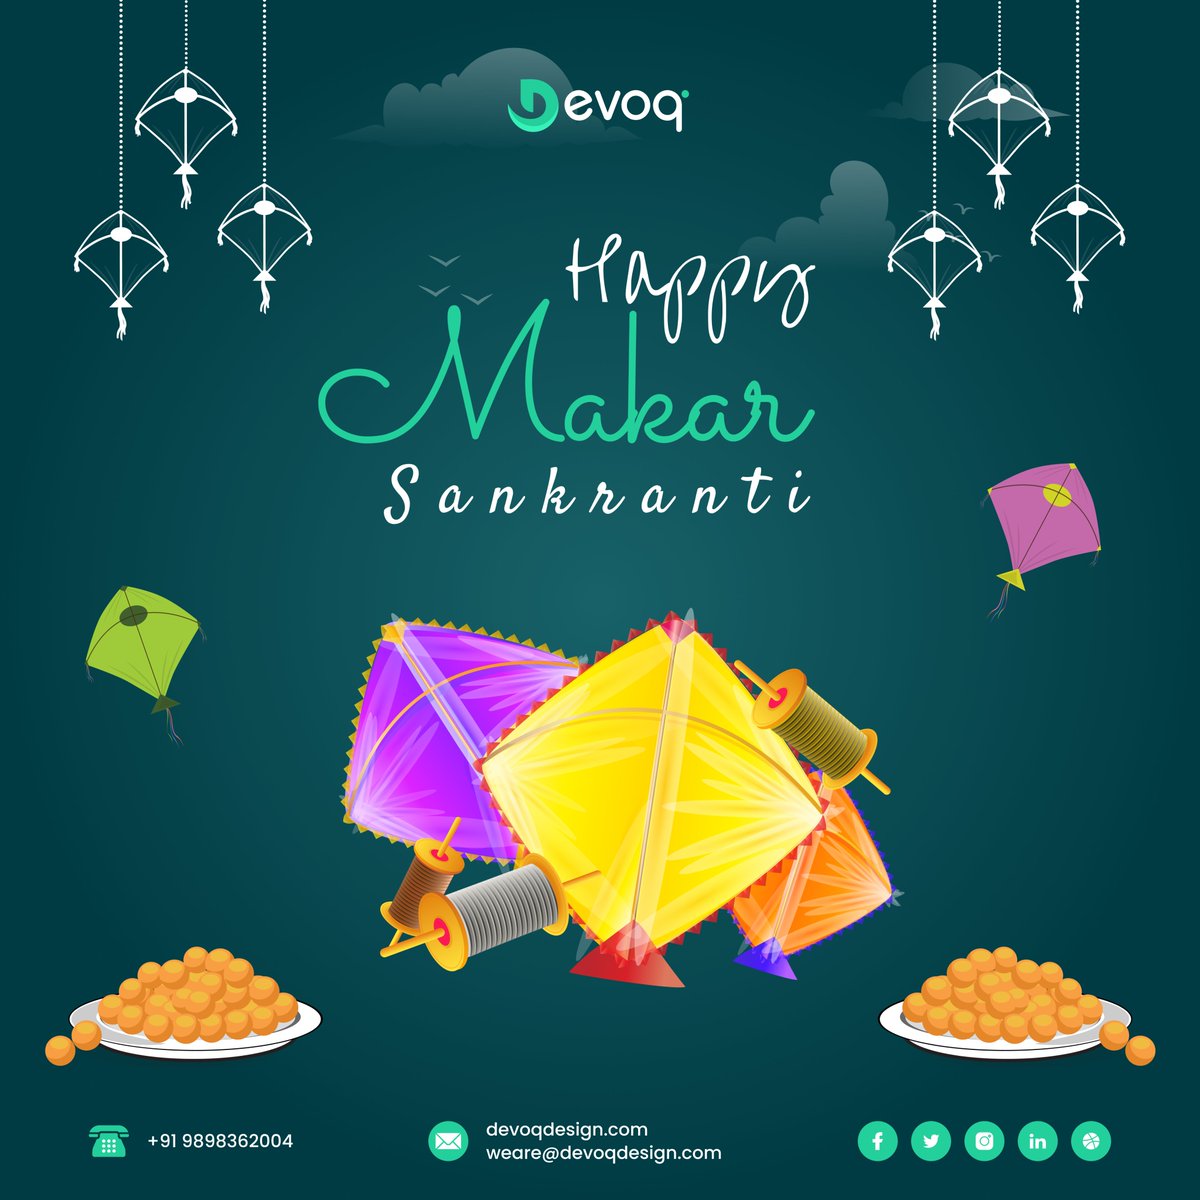 May the lively spirit of Makar Sankranti bring joy and prosperity to your life! Wishing you and your loved ones a bountiful harvest of happiness and success. Happy Makar Sankranti from Devoq Design.

#MakarSankranti #FestivalGreetings #DevoqDesign #Devoq